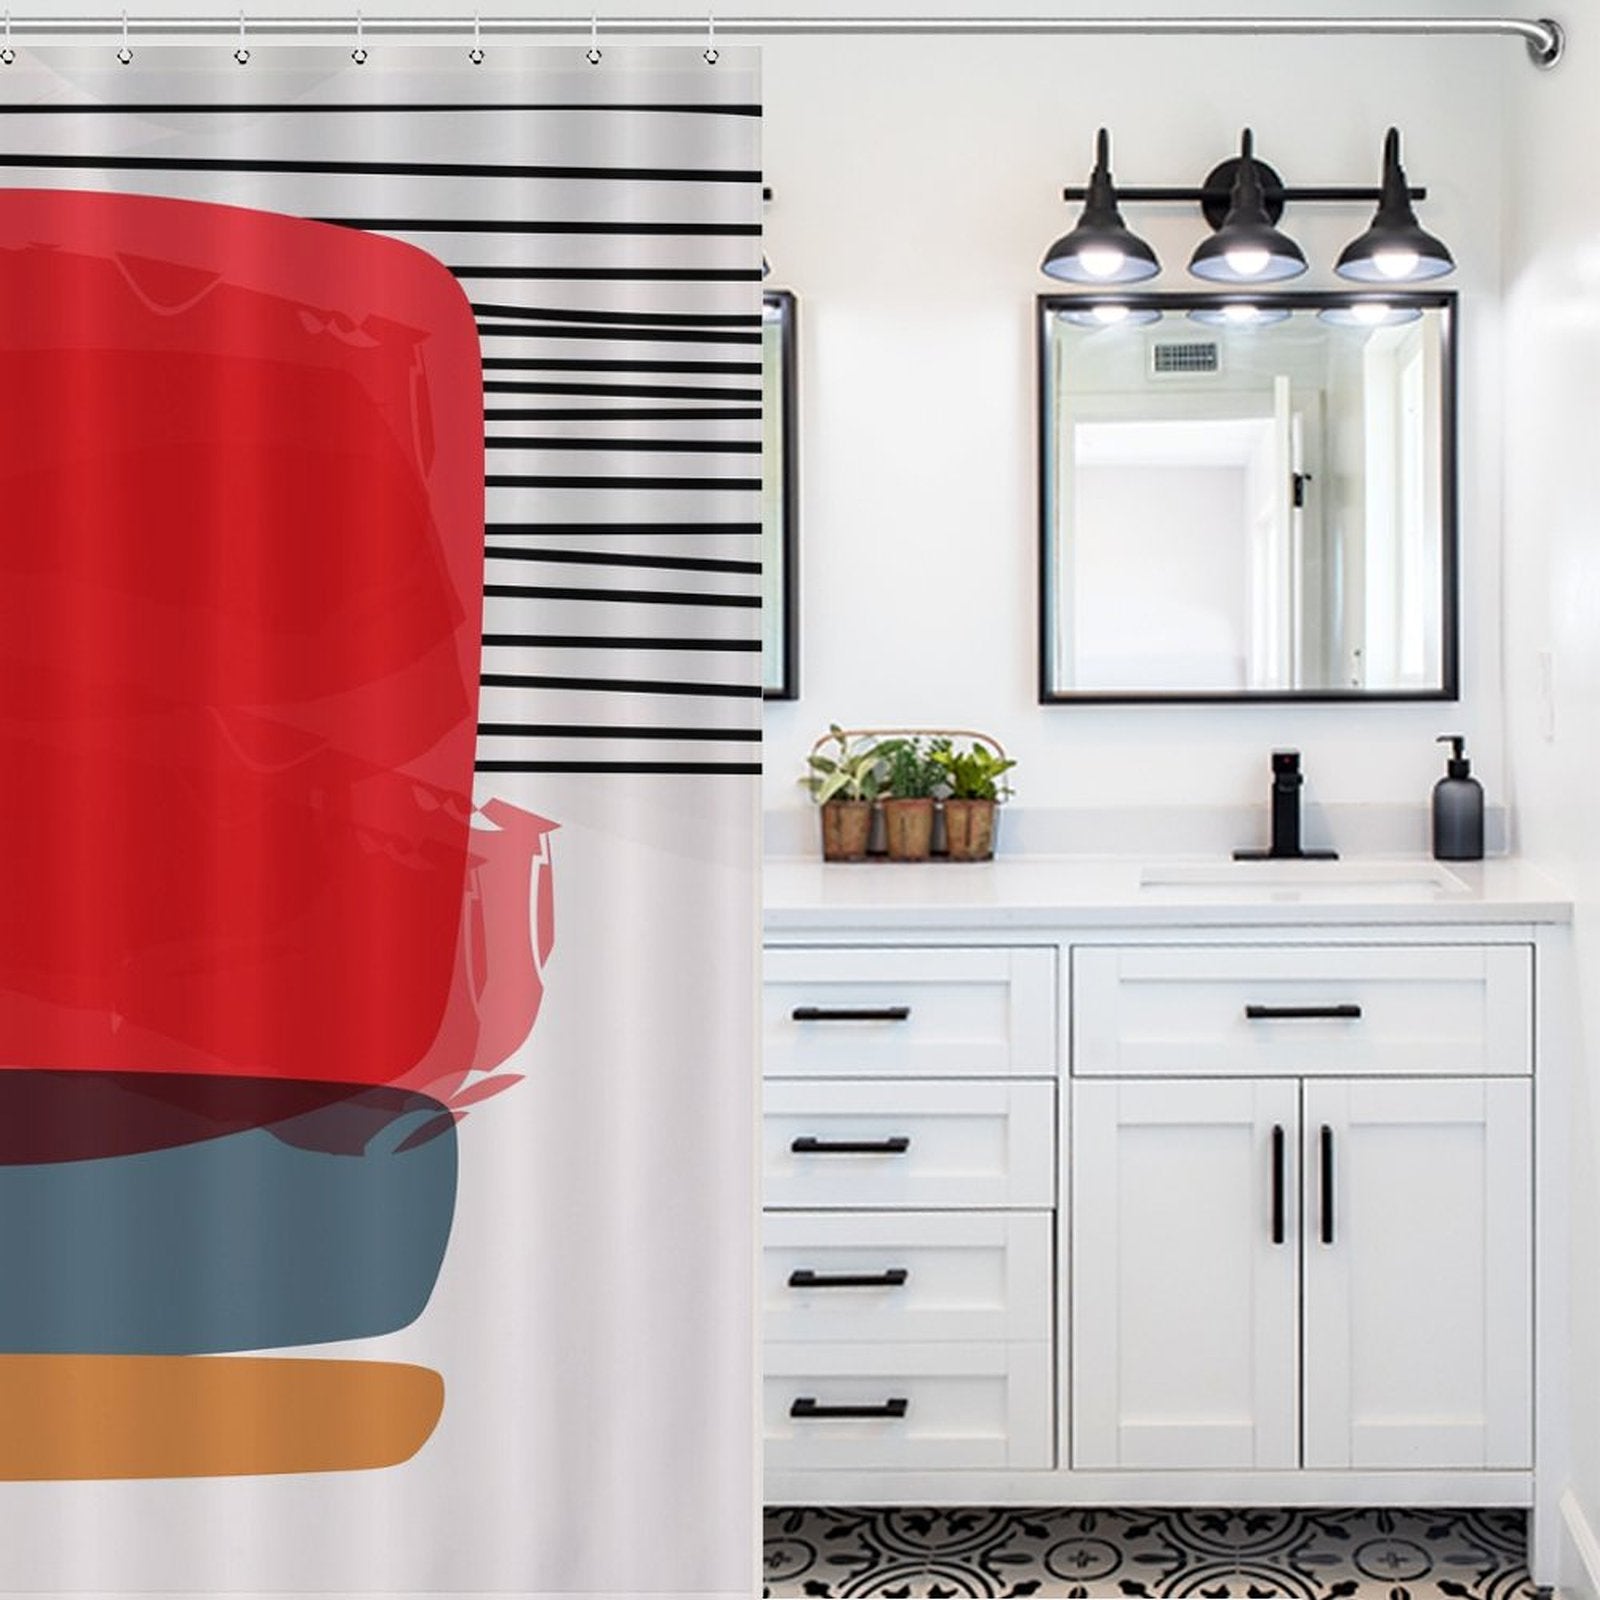 Bathroom with a white vanity, two mirrors, and a black and white patterned floor. The shower curtain features the Modern Geometric Art Minimalist Simple Red Blue Orange Abstract Shower Curtain-Cottoncat by Cotton Cat, adding a touch of modern geometric art to the decor.